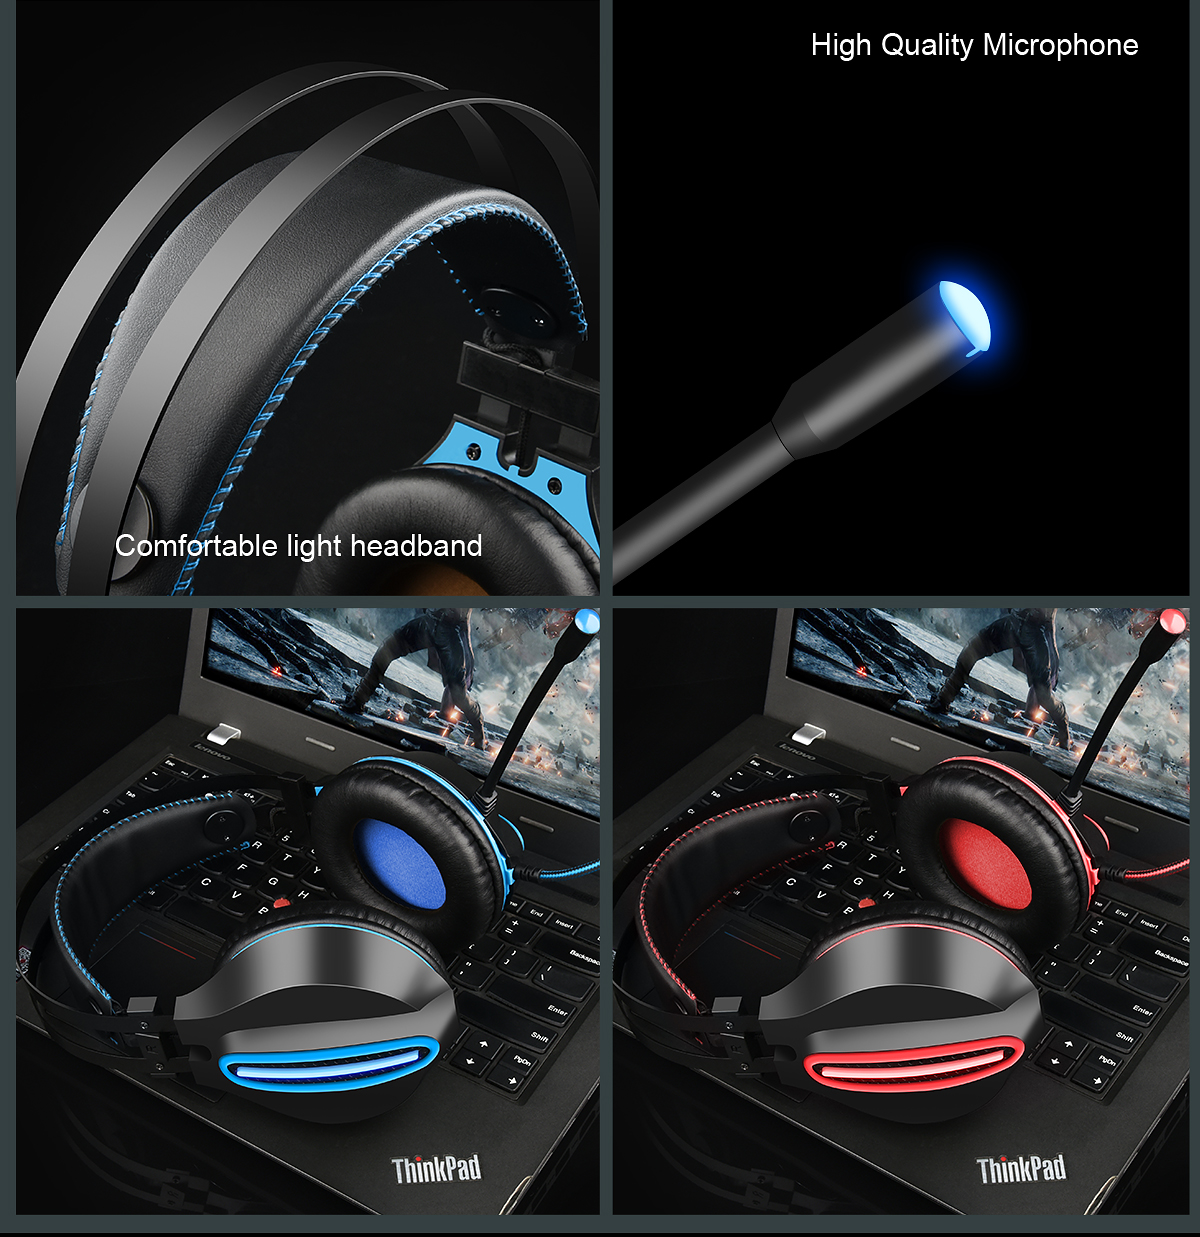 OVLENG-GT62-Wired-Gaming-Headset-35mm-Jack-50mm-Bass-Stereo-Sound-LED-Light-E-sport-Headphone-with-M-1817595-15